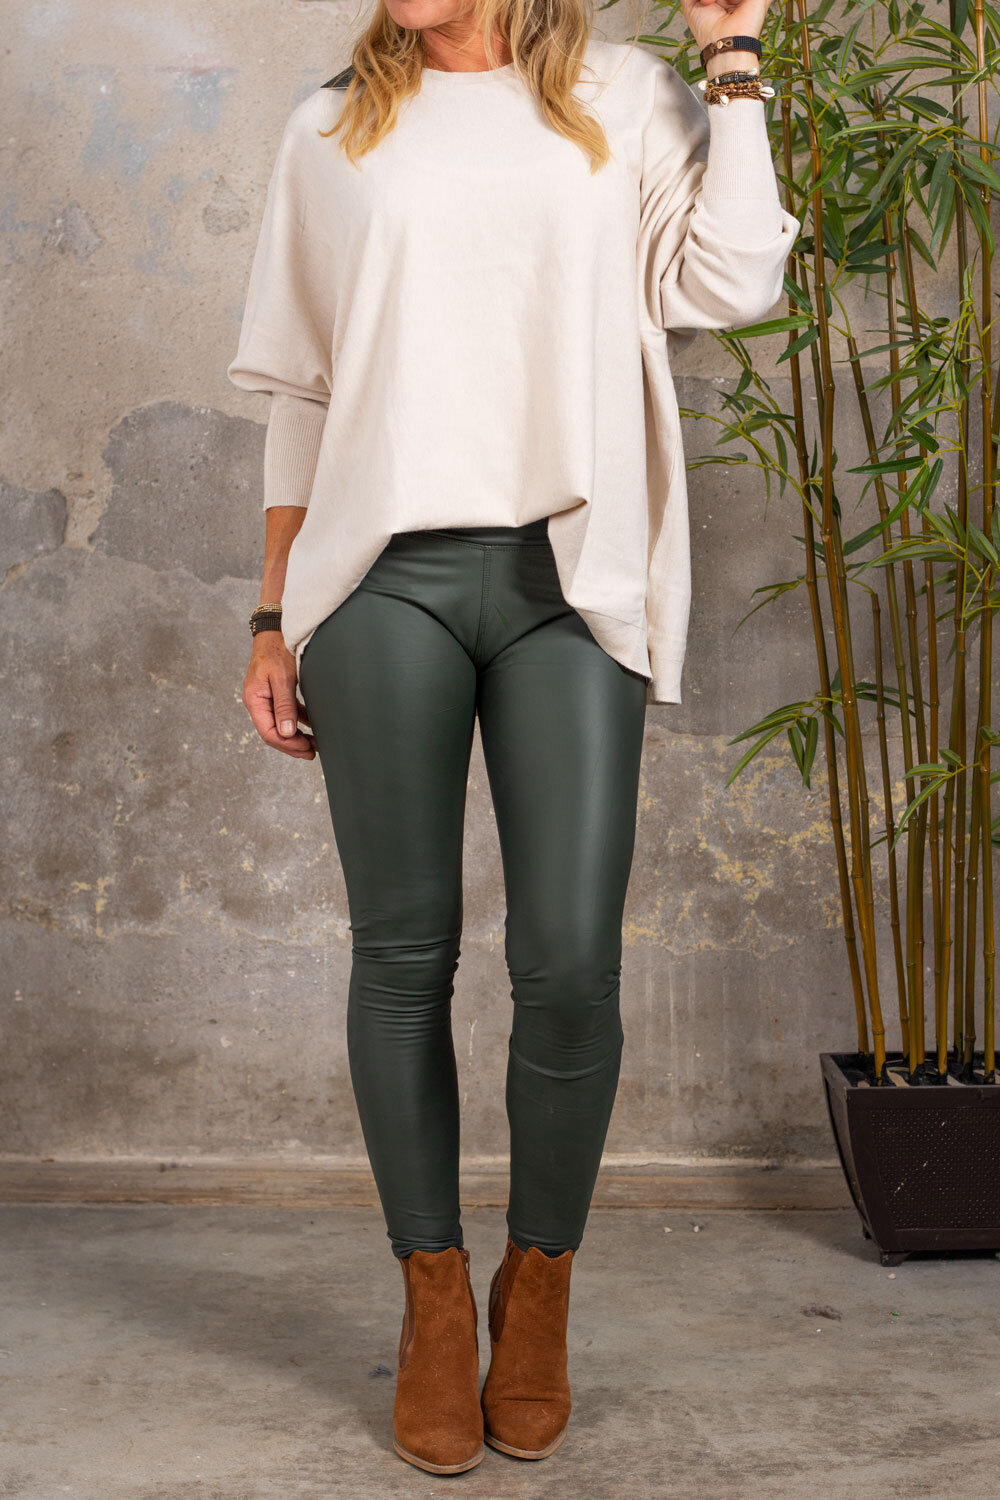 Faux leather leggings - LM1060 - Army green